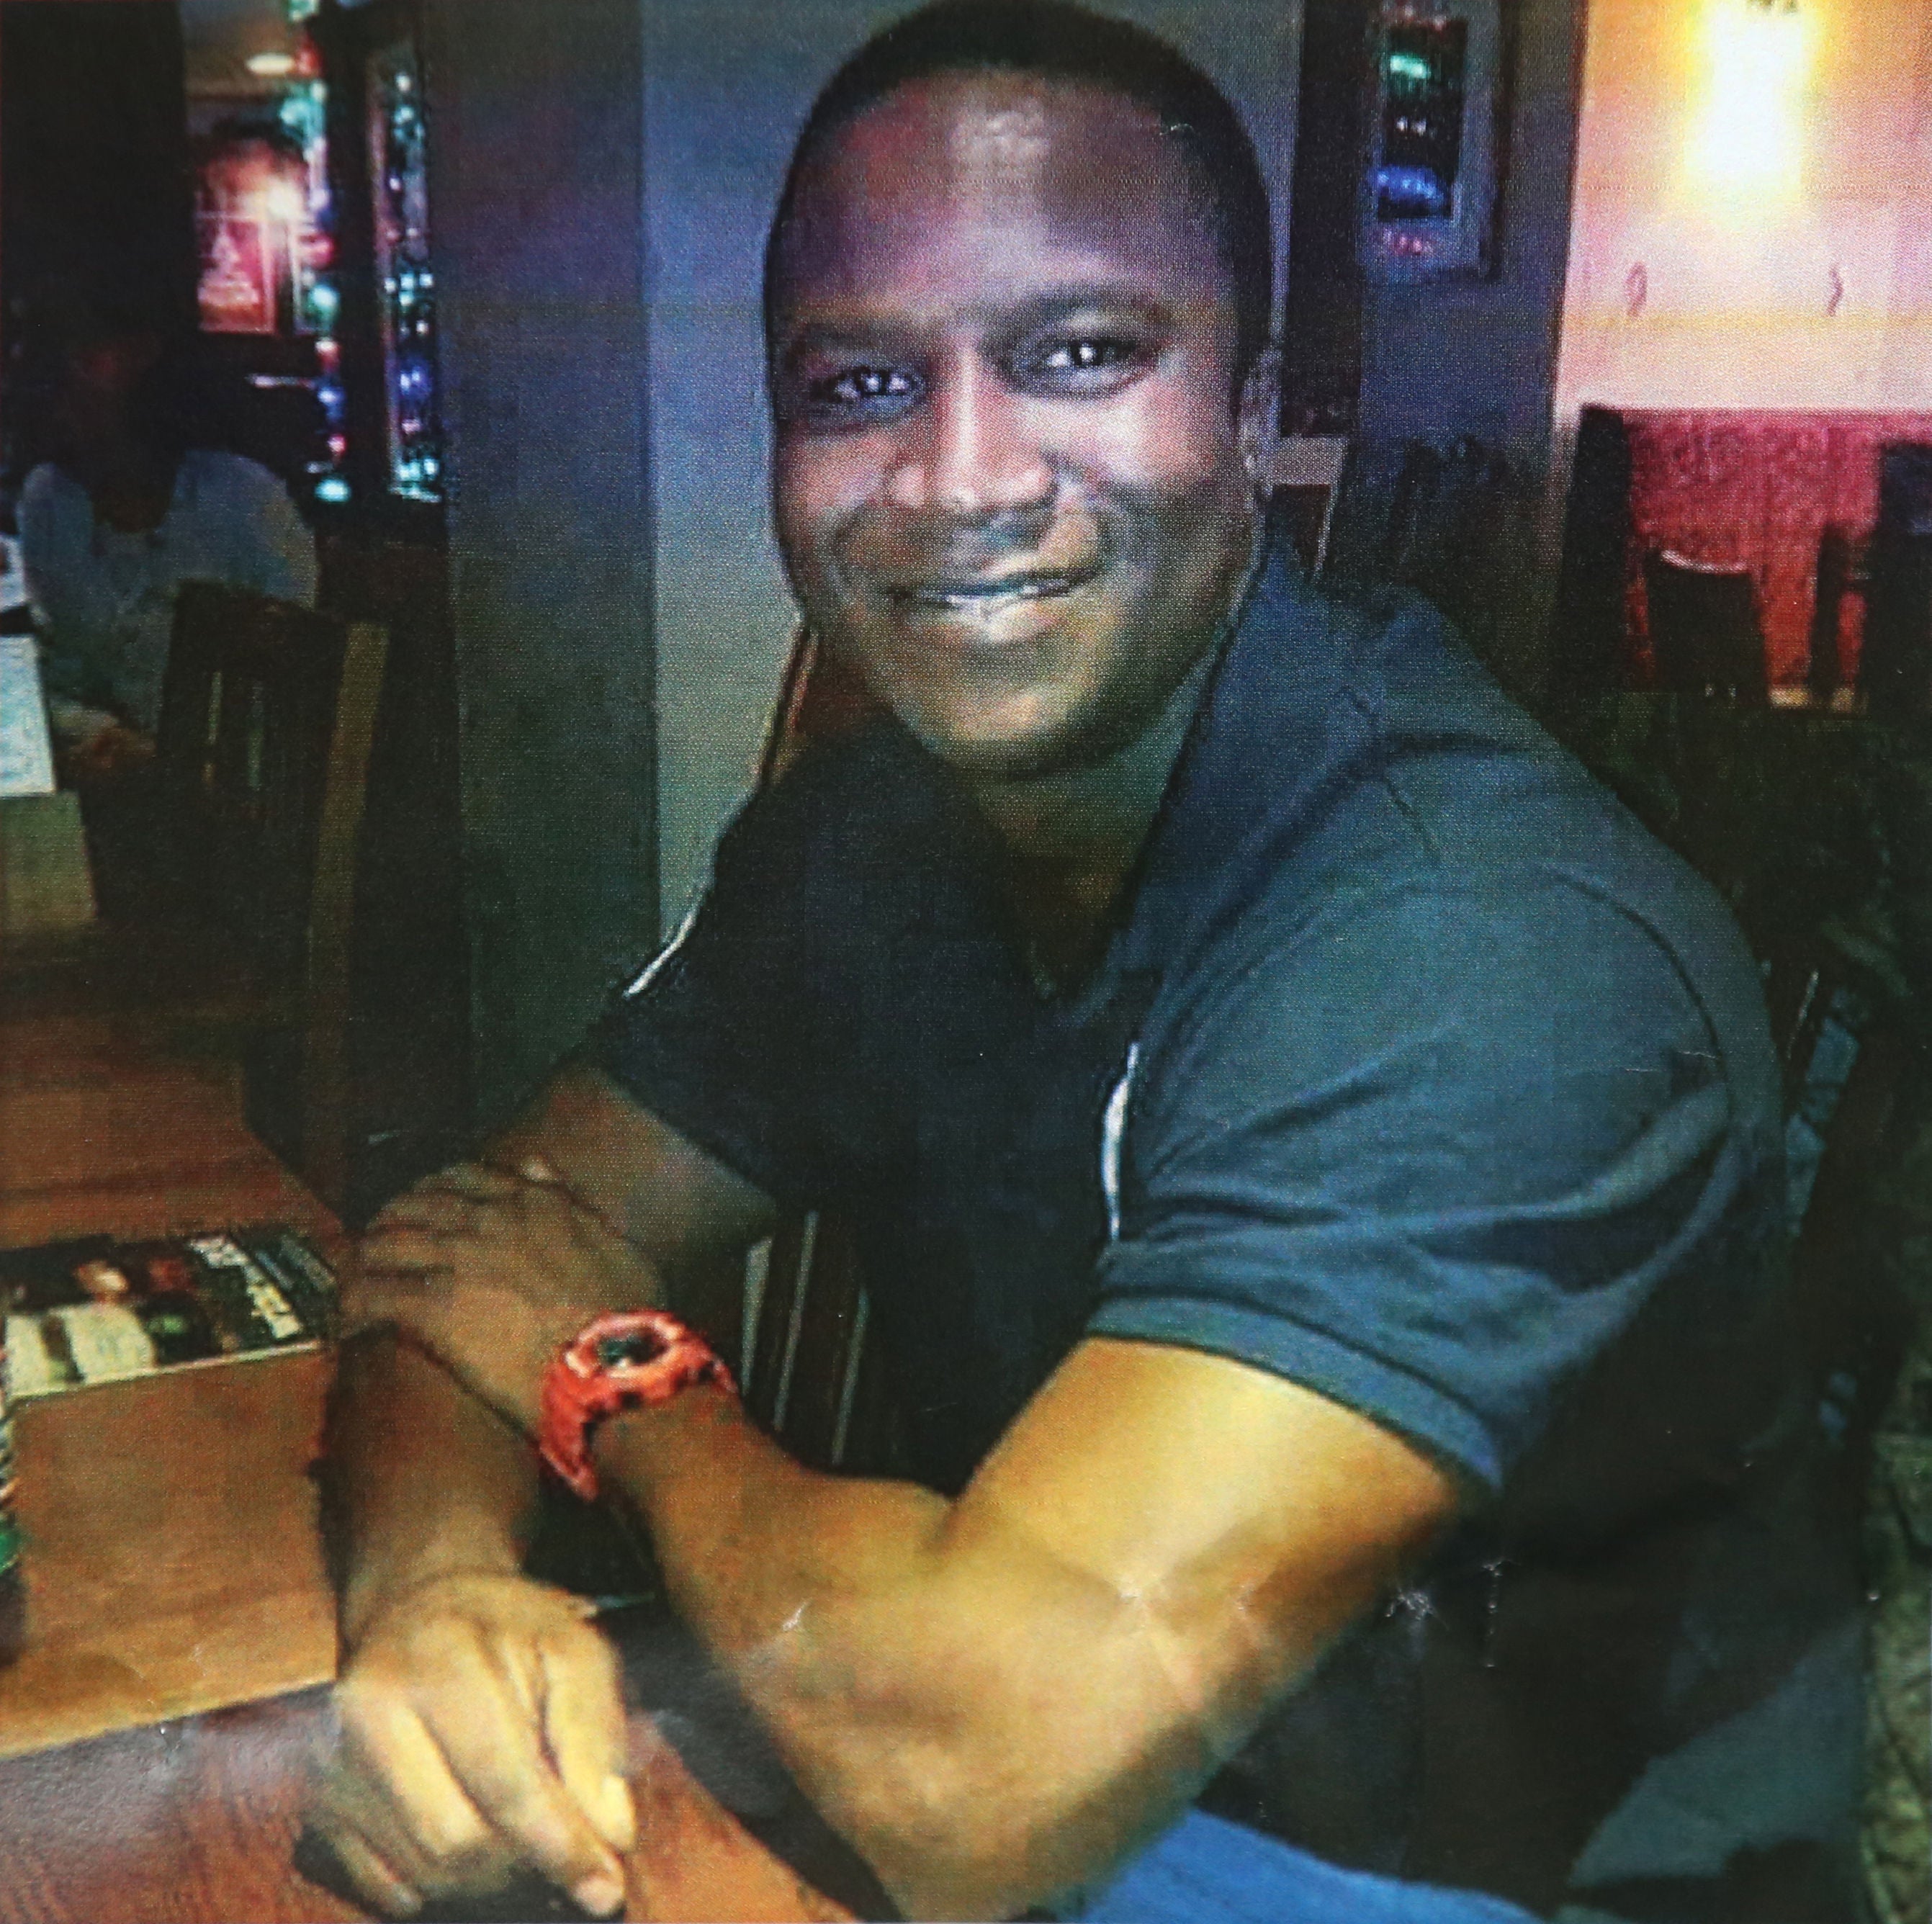 Sheku Bayoh, 31, died after being restrained by police in 2015 (handout/PA)